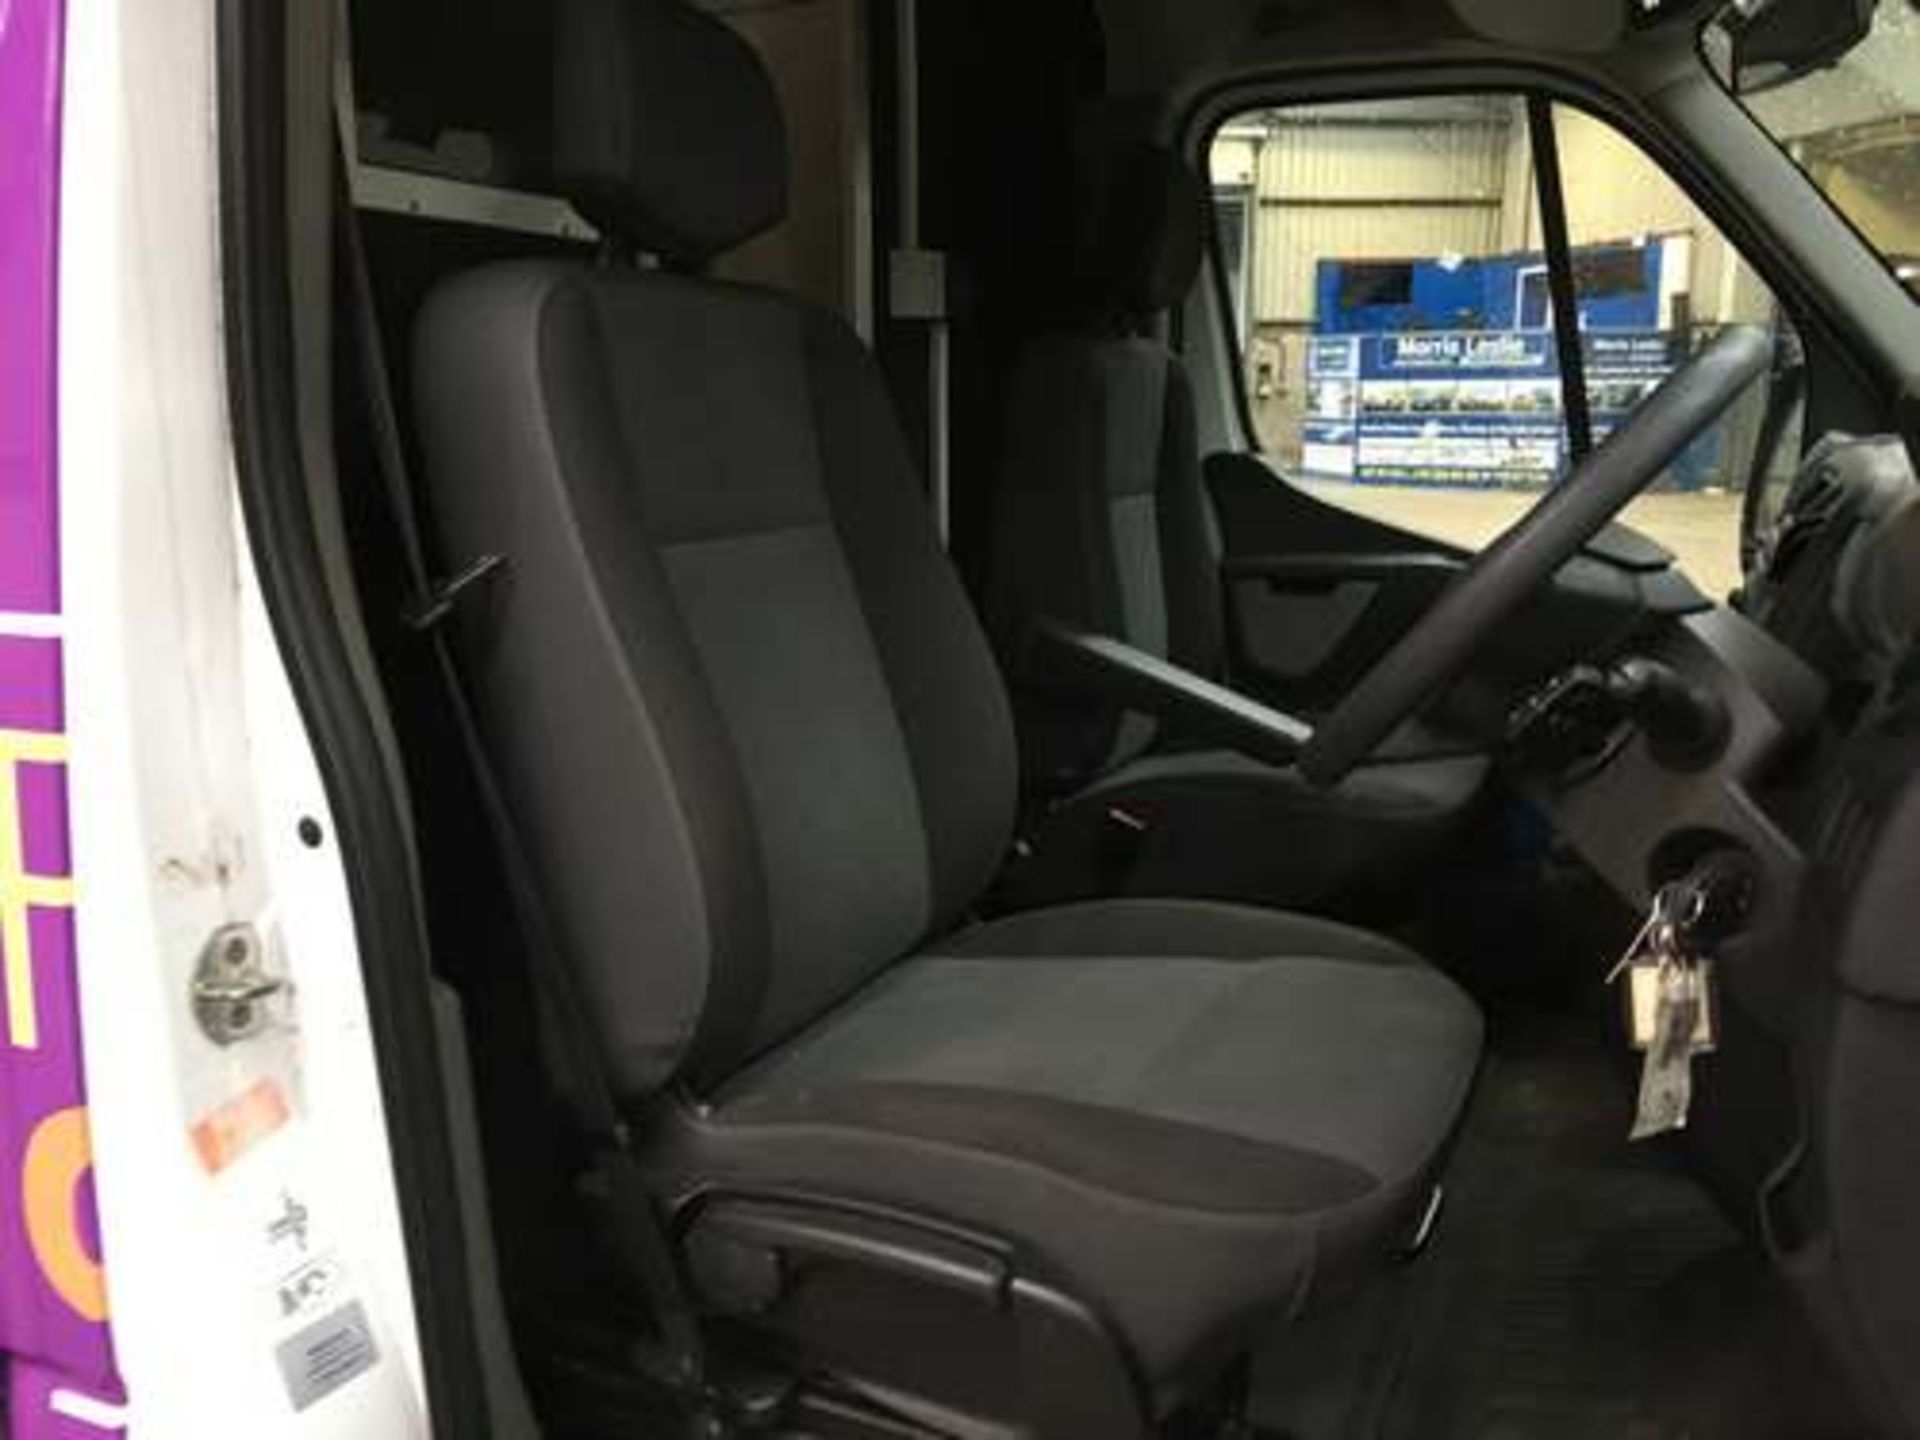 RENAULT MASTER LL35 DCI 125 - 2298cc - Image 10 of 33